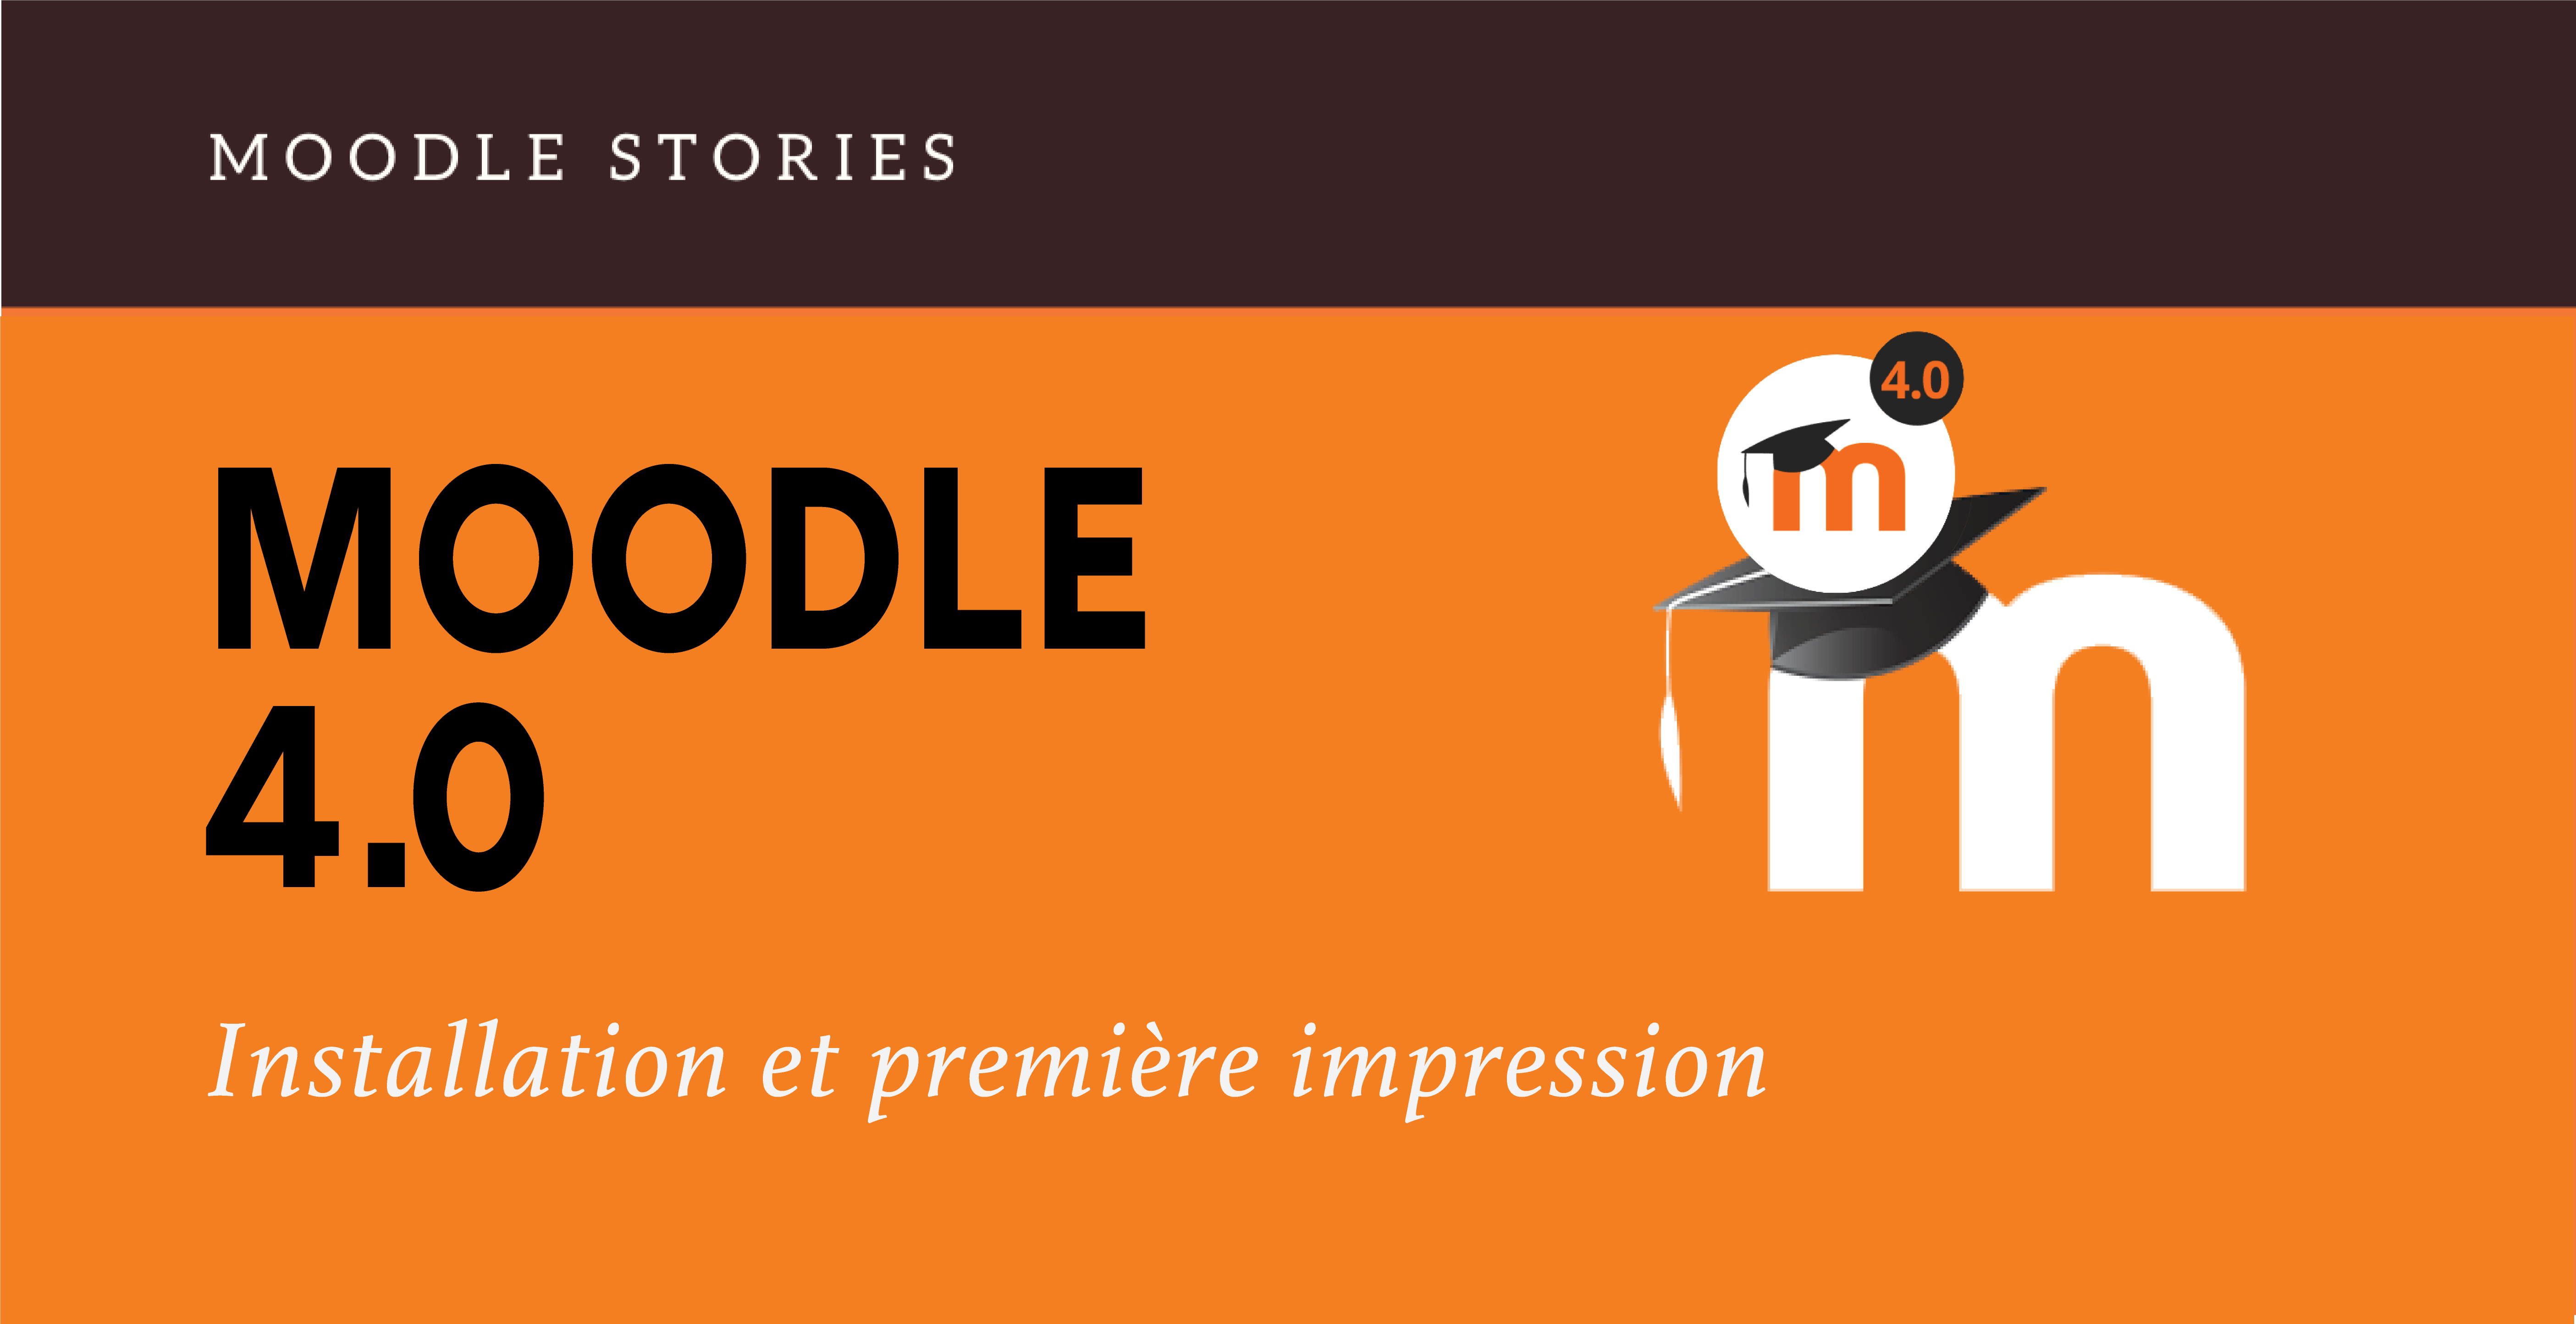 You are currently viewing Moodle stories : Moodle 4.0 – installation et première impression [2022]